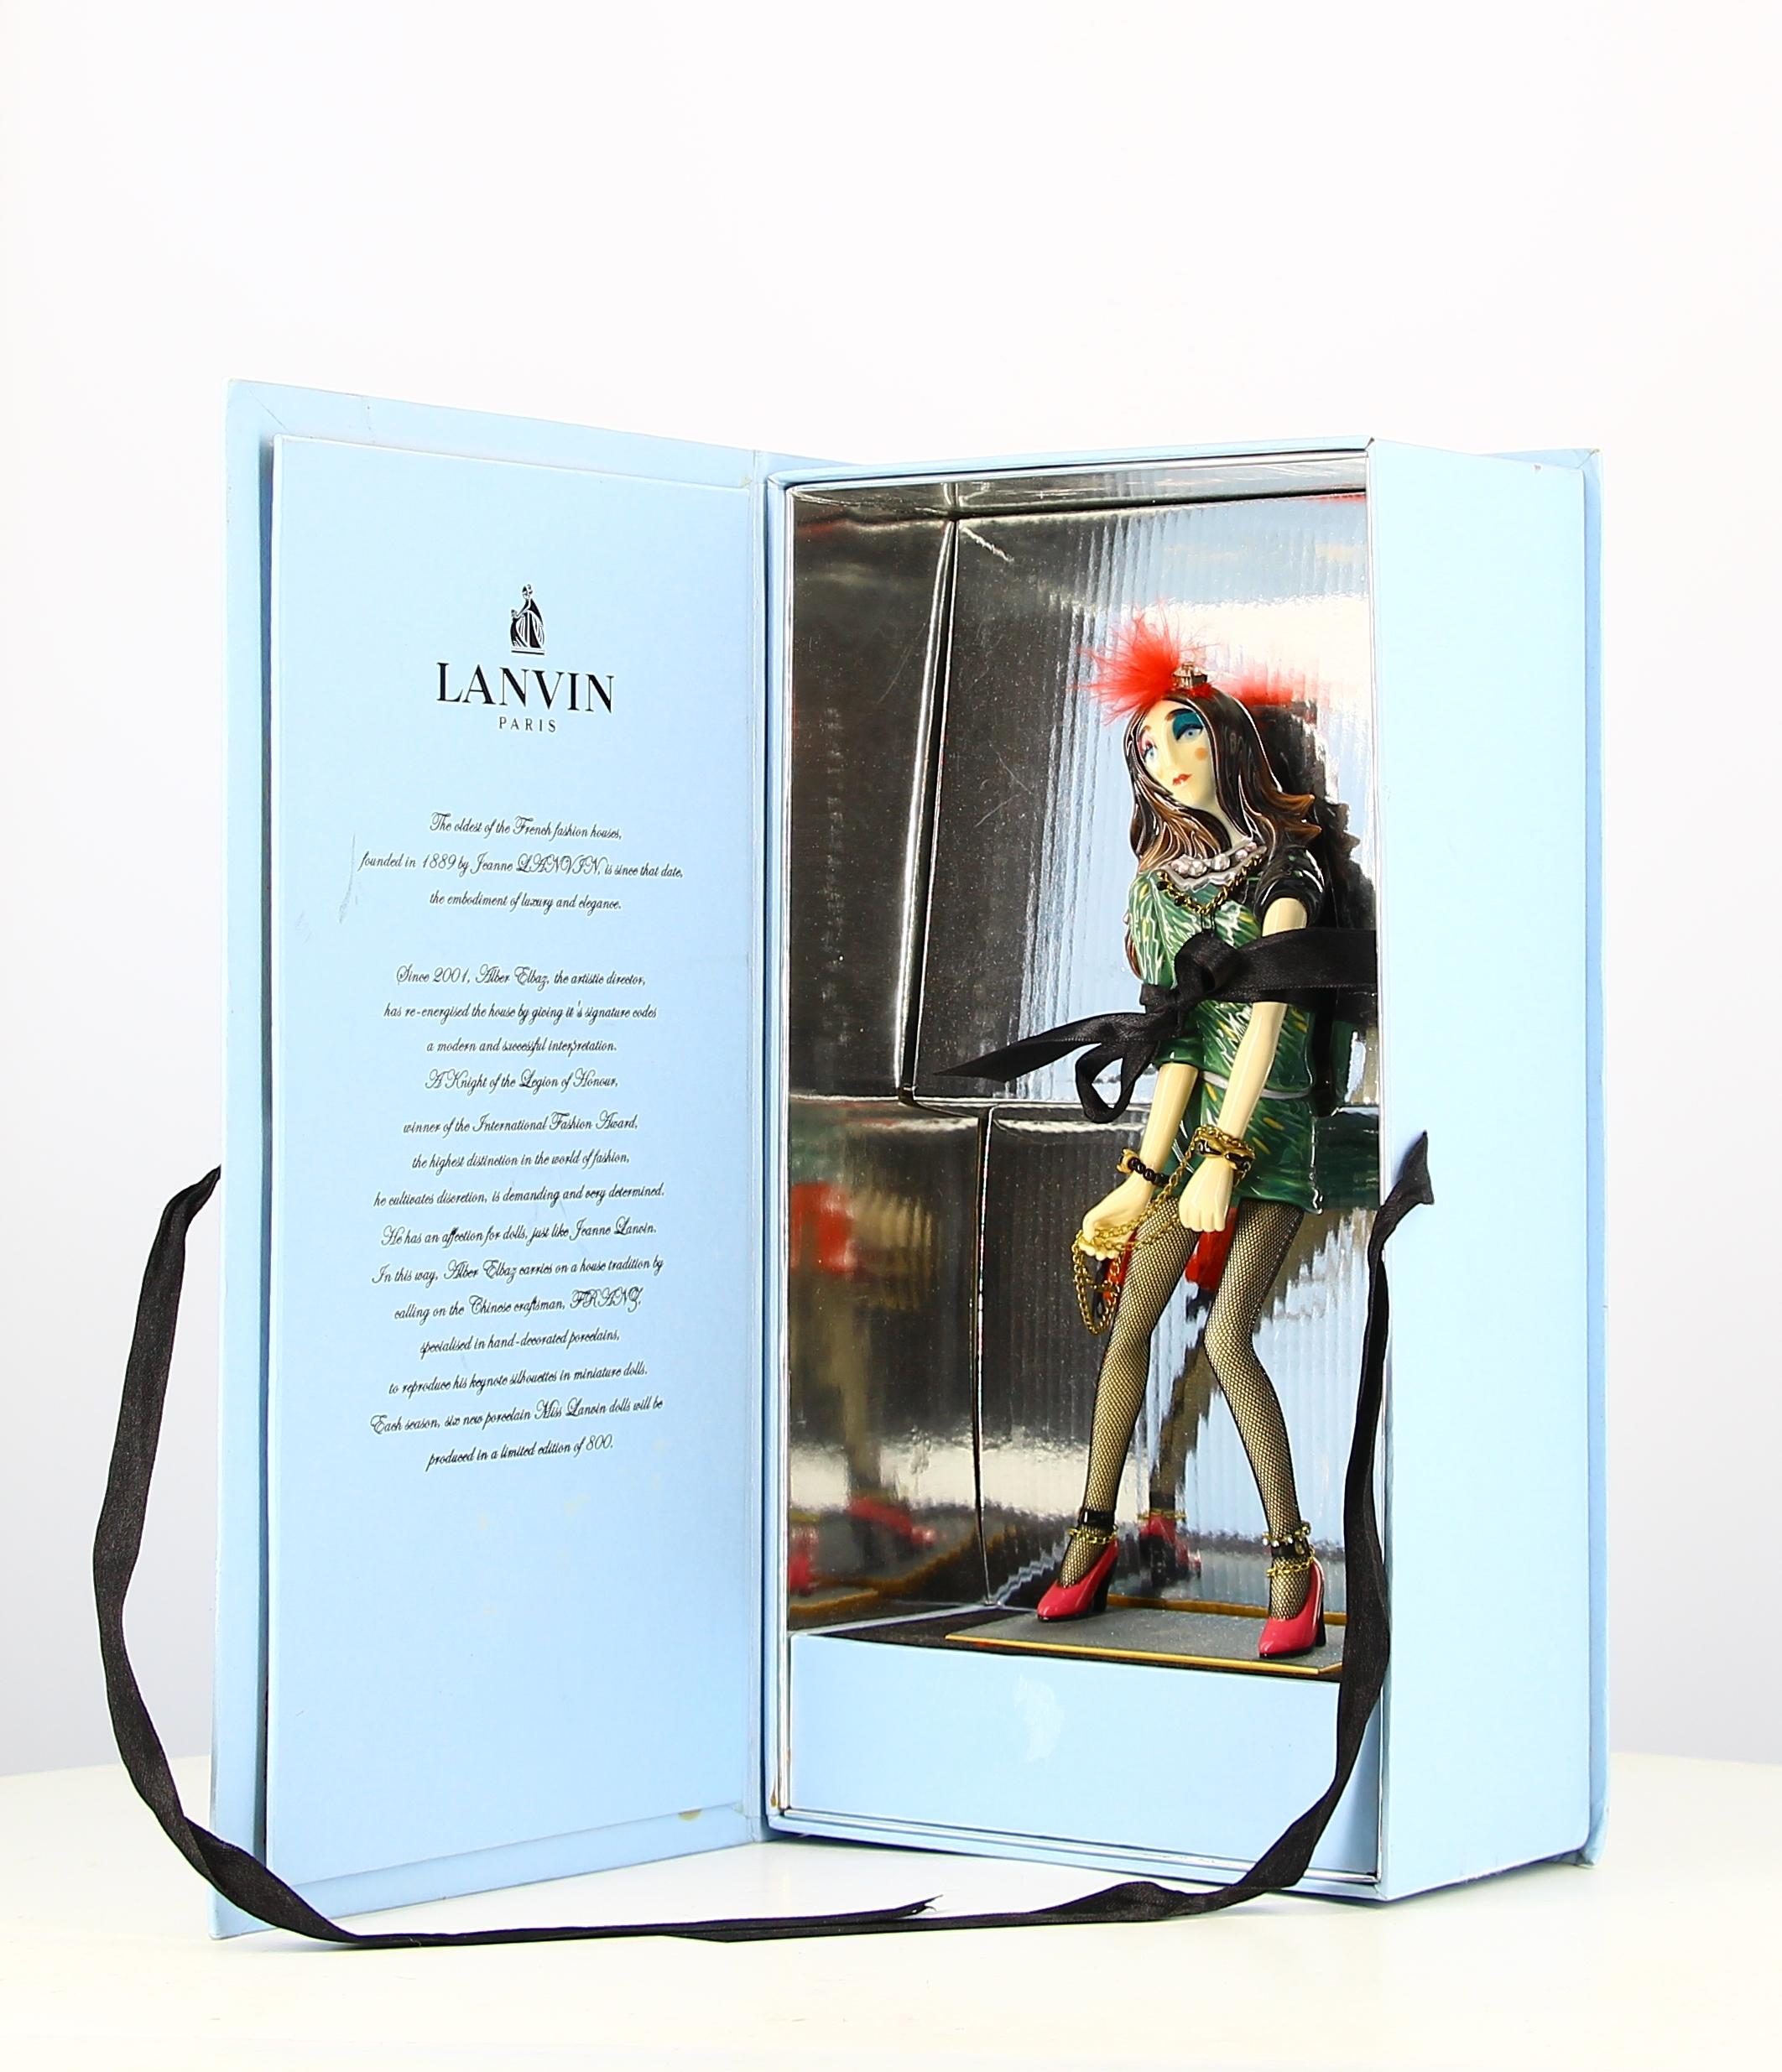 - Lanvin collection doll in it's original box
- Great condition, shows some light signs of use but nothing visible.
- The doll wear a green Lanvin dress, a feather hat and some red heels.
